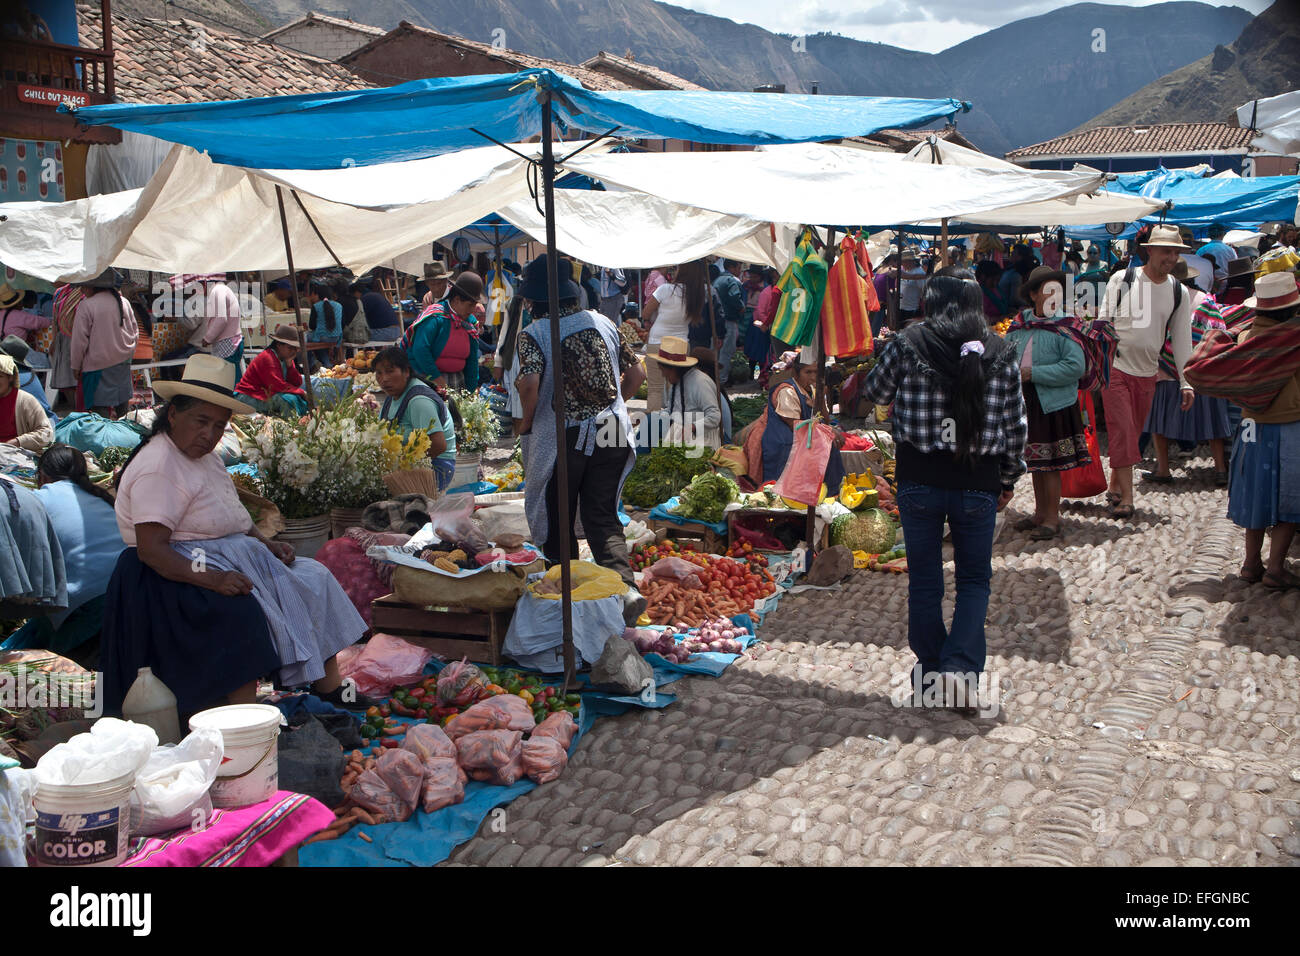 Traders and customers at country market, Pisac, Peru Stock Photo